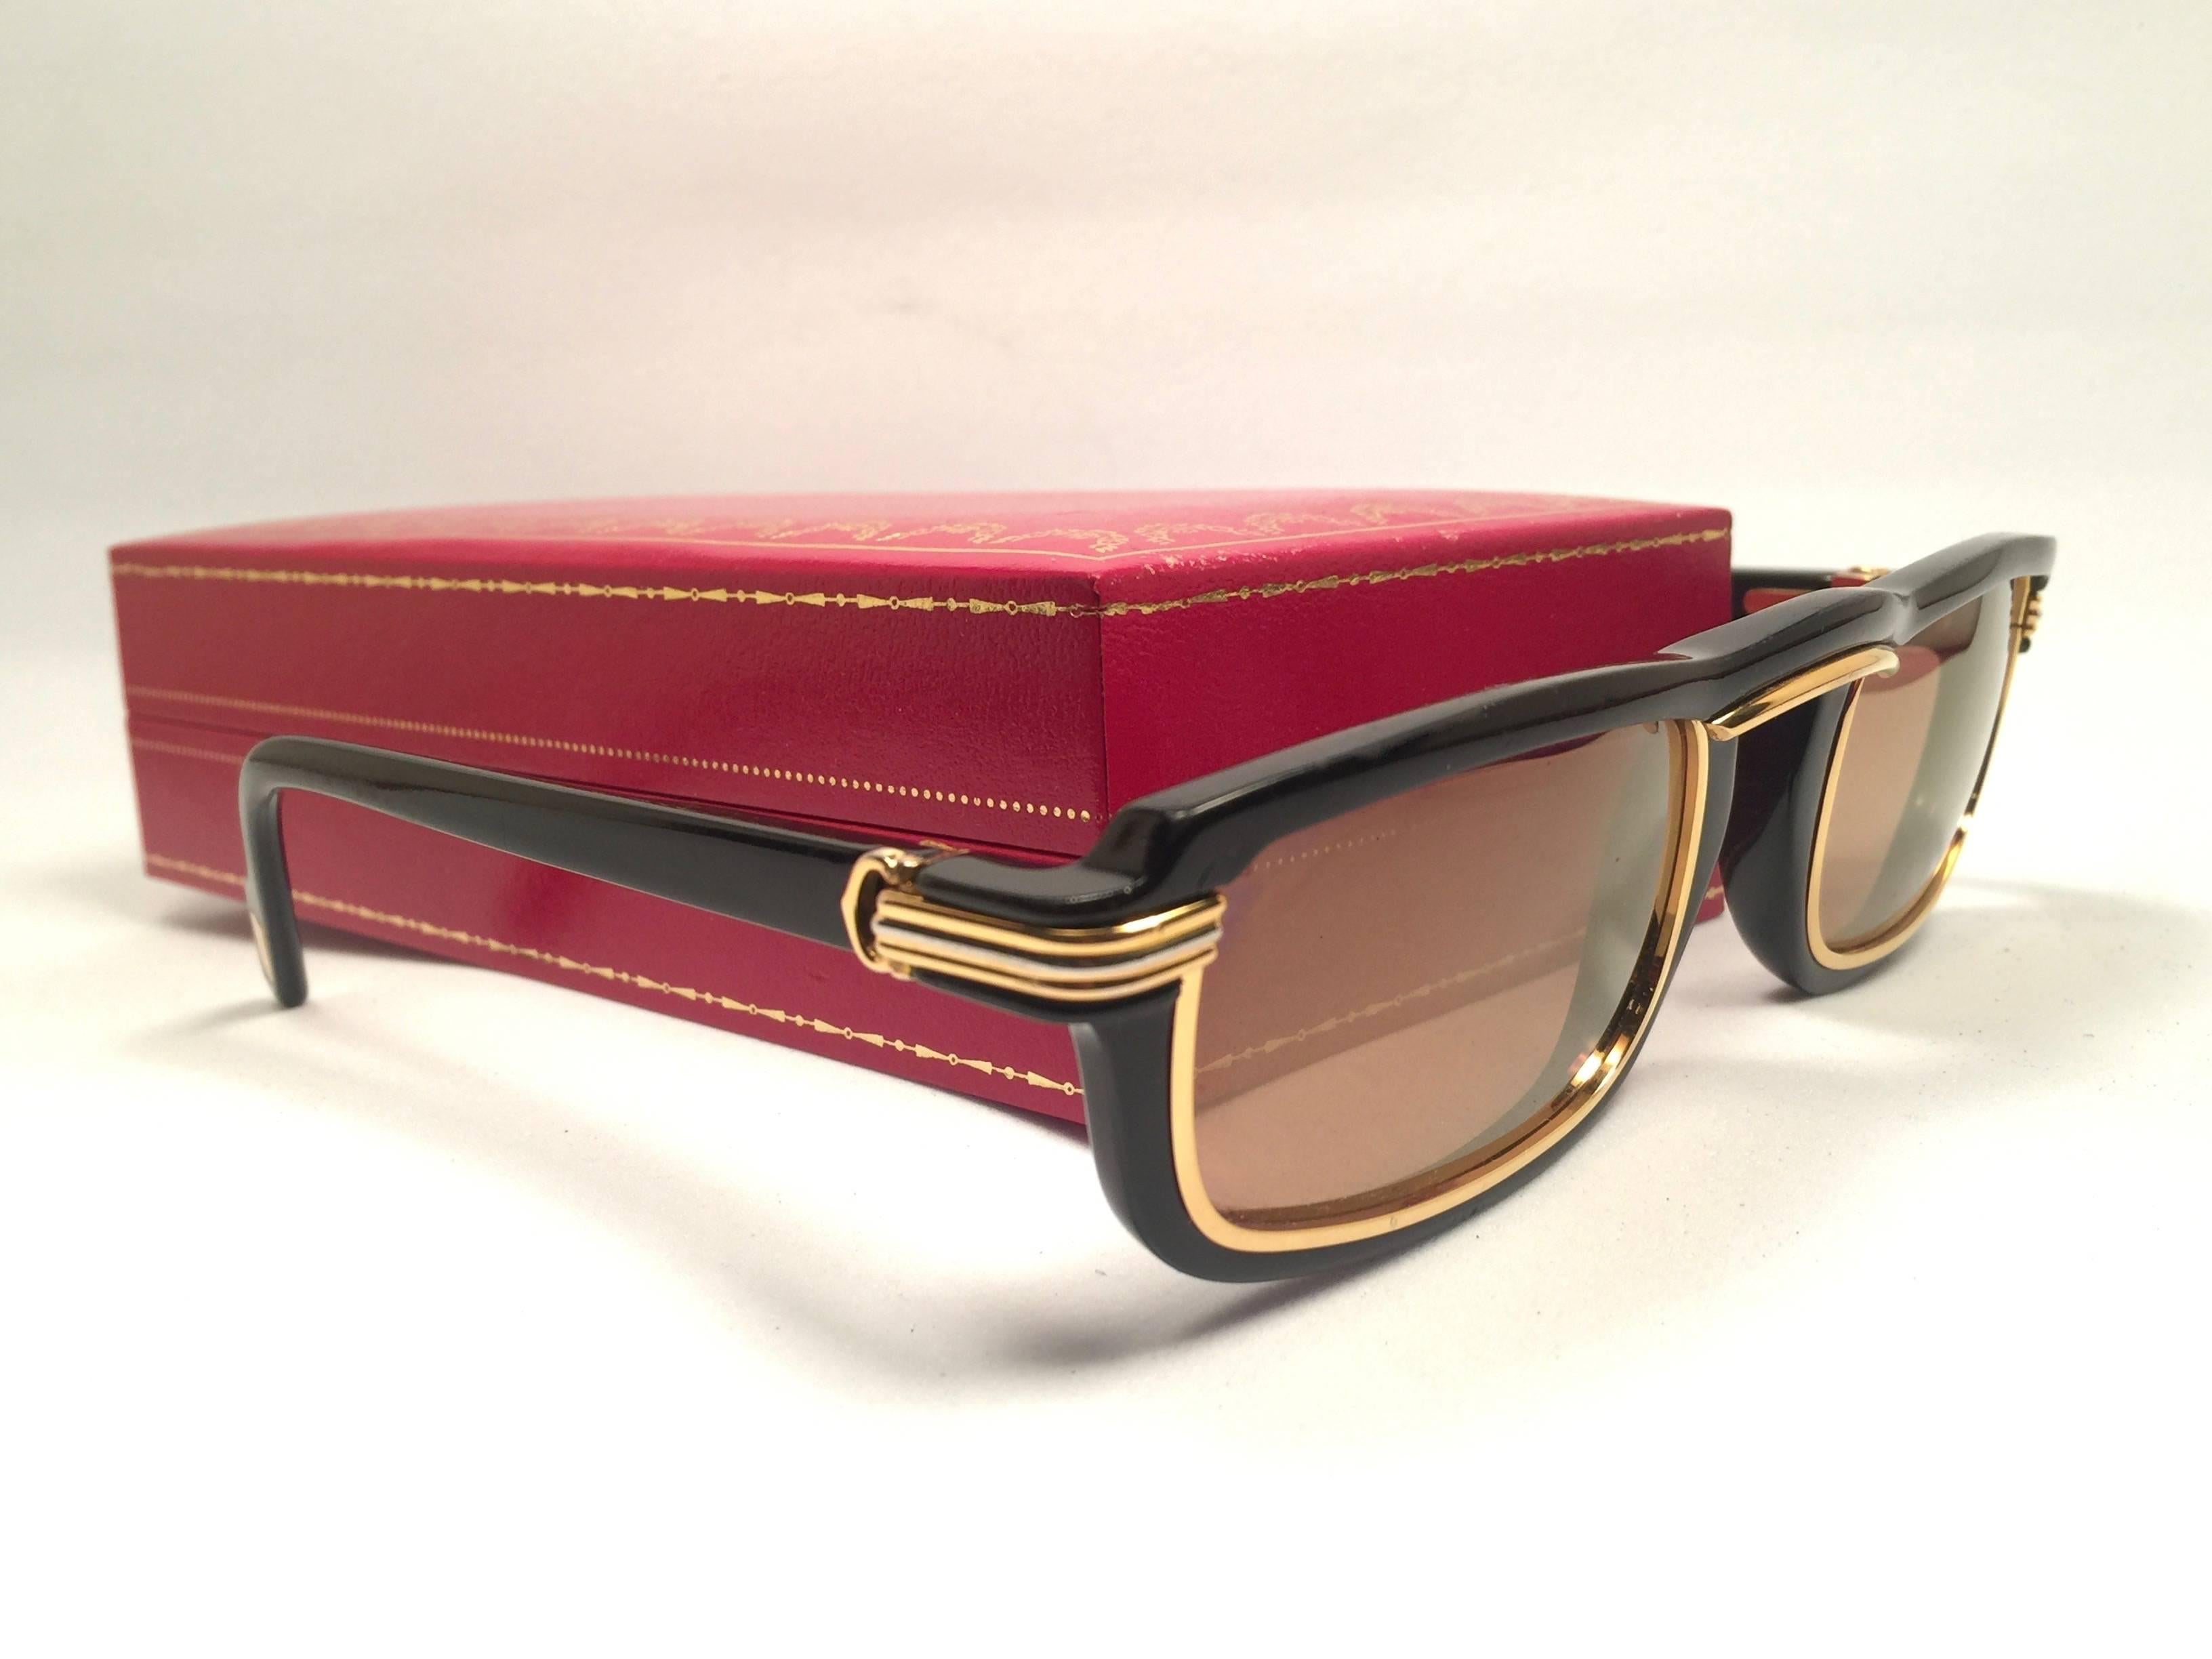 New 1991 Original Cartier Vertigo Art Deco Sunglasses with spotless amazing Cartier (uv protection) lenses.
Frame has the famous real gold and white gold accents in the middle and on the sides.
All hallmarks. Cartier gold signs on the earpaddles.